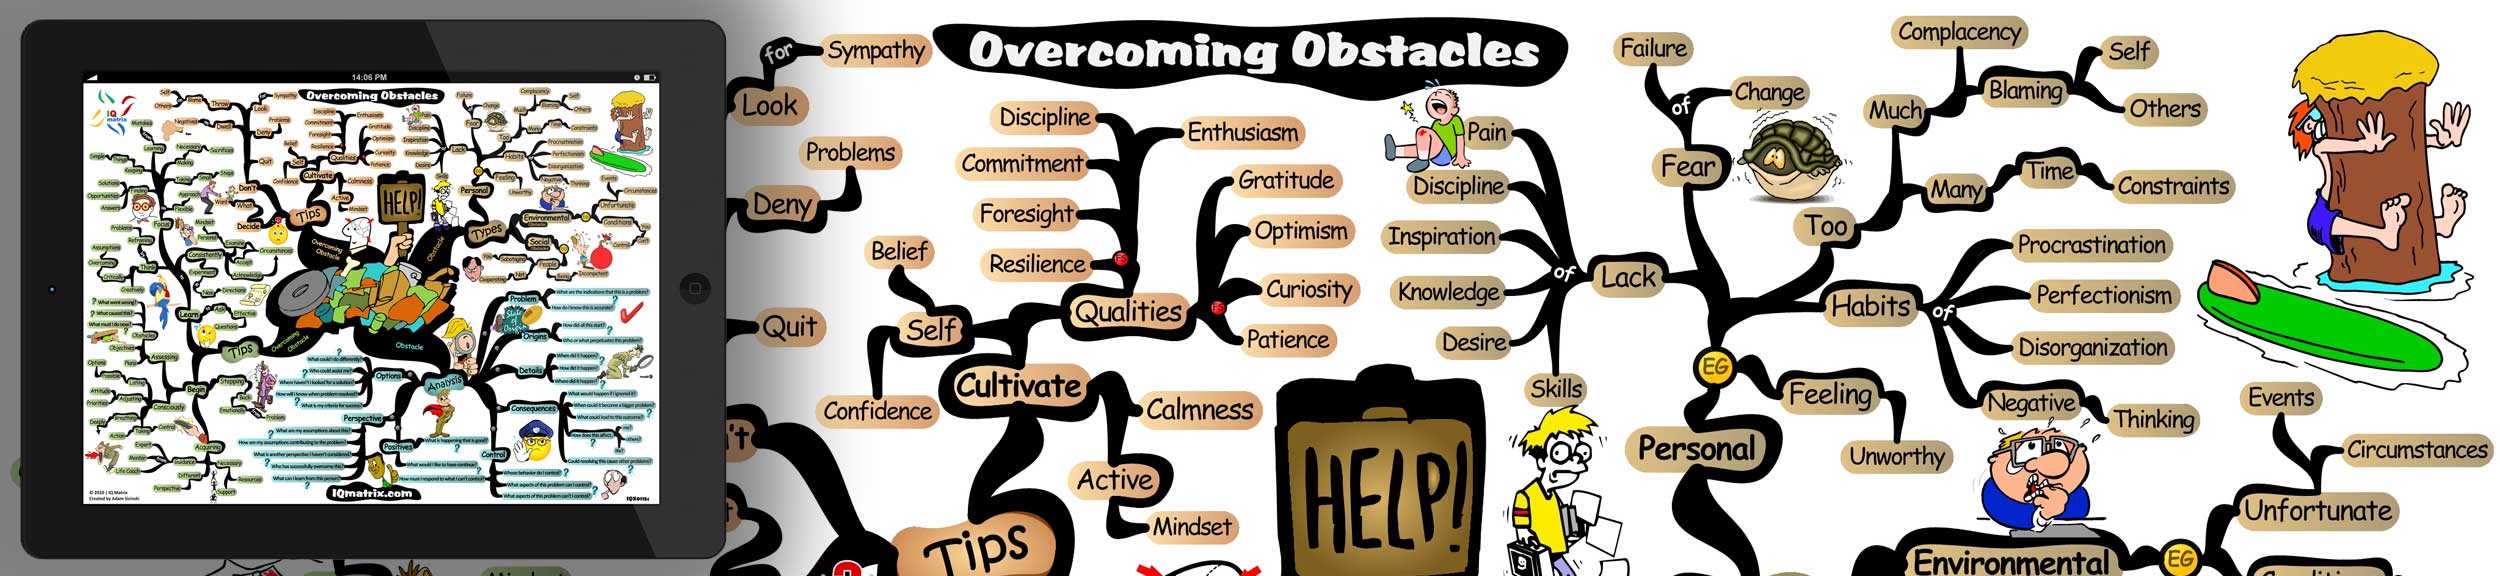 Greatest obstacle you've overcome essay